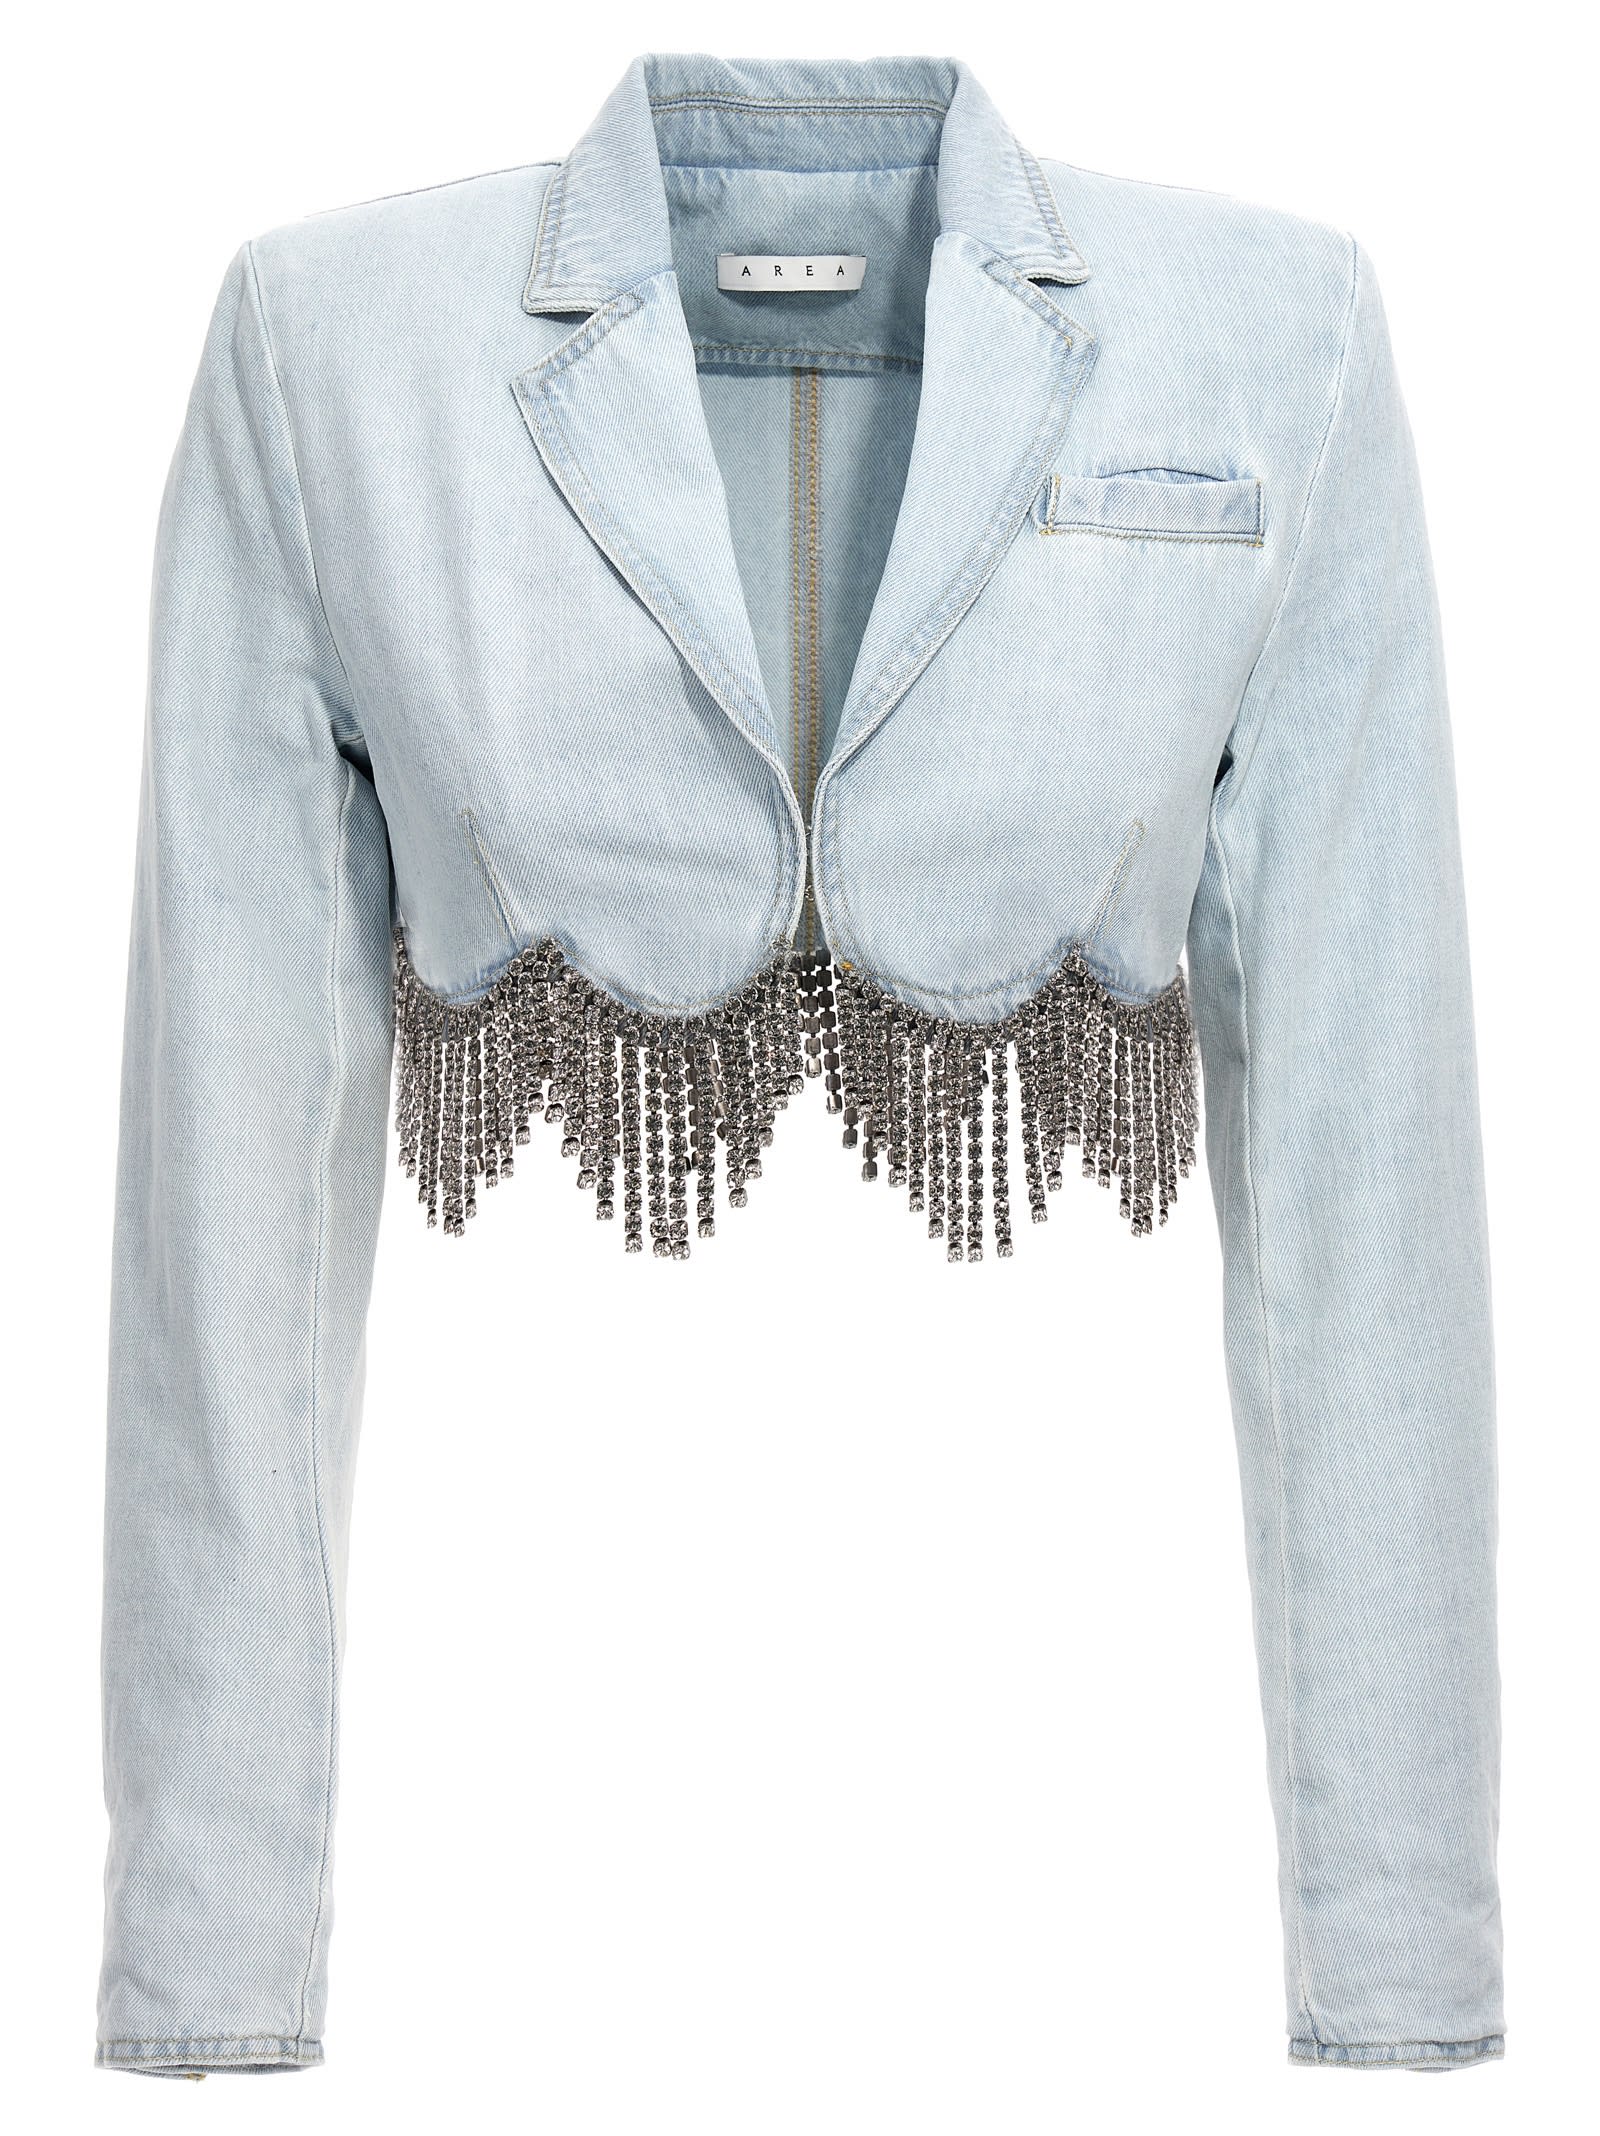 AREA SCALLOPED CRYSTAL CROPPED JACKET